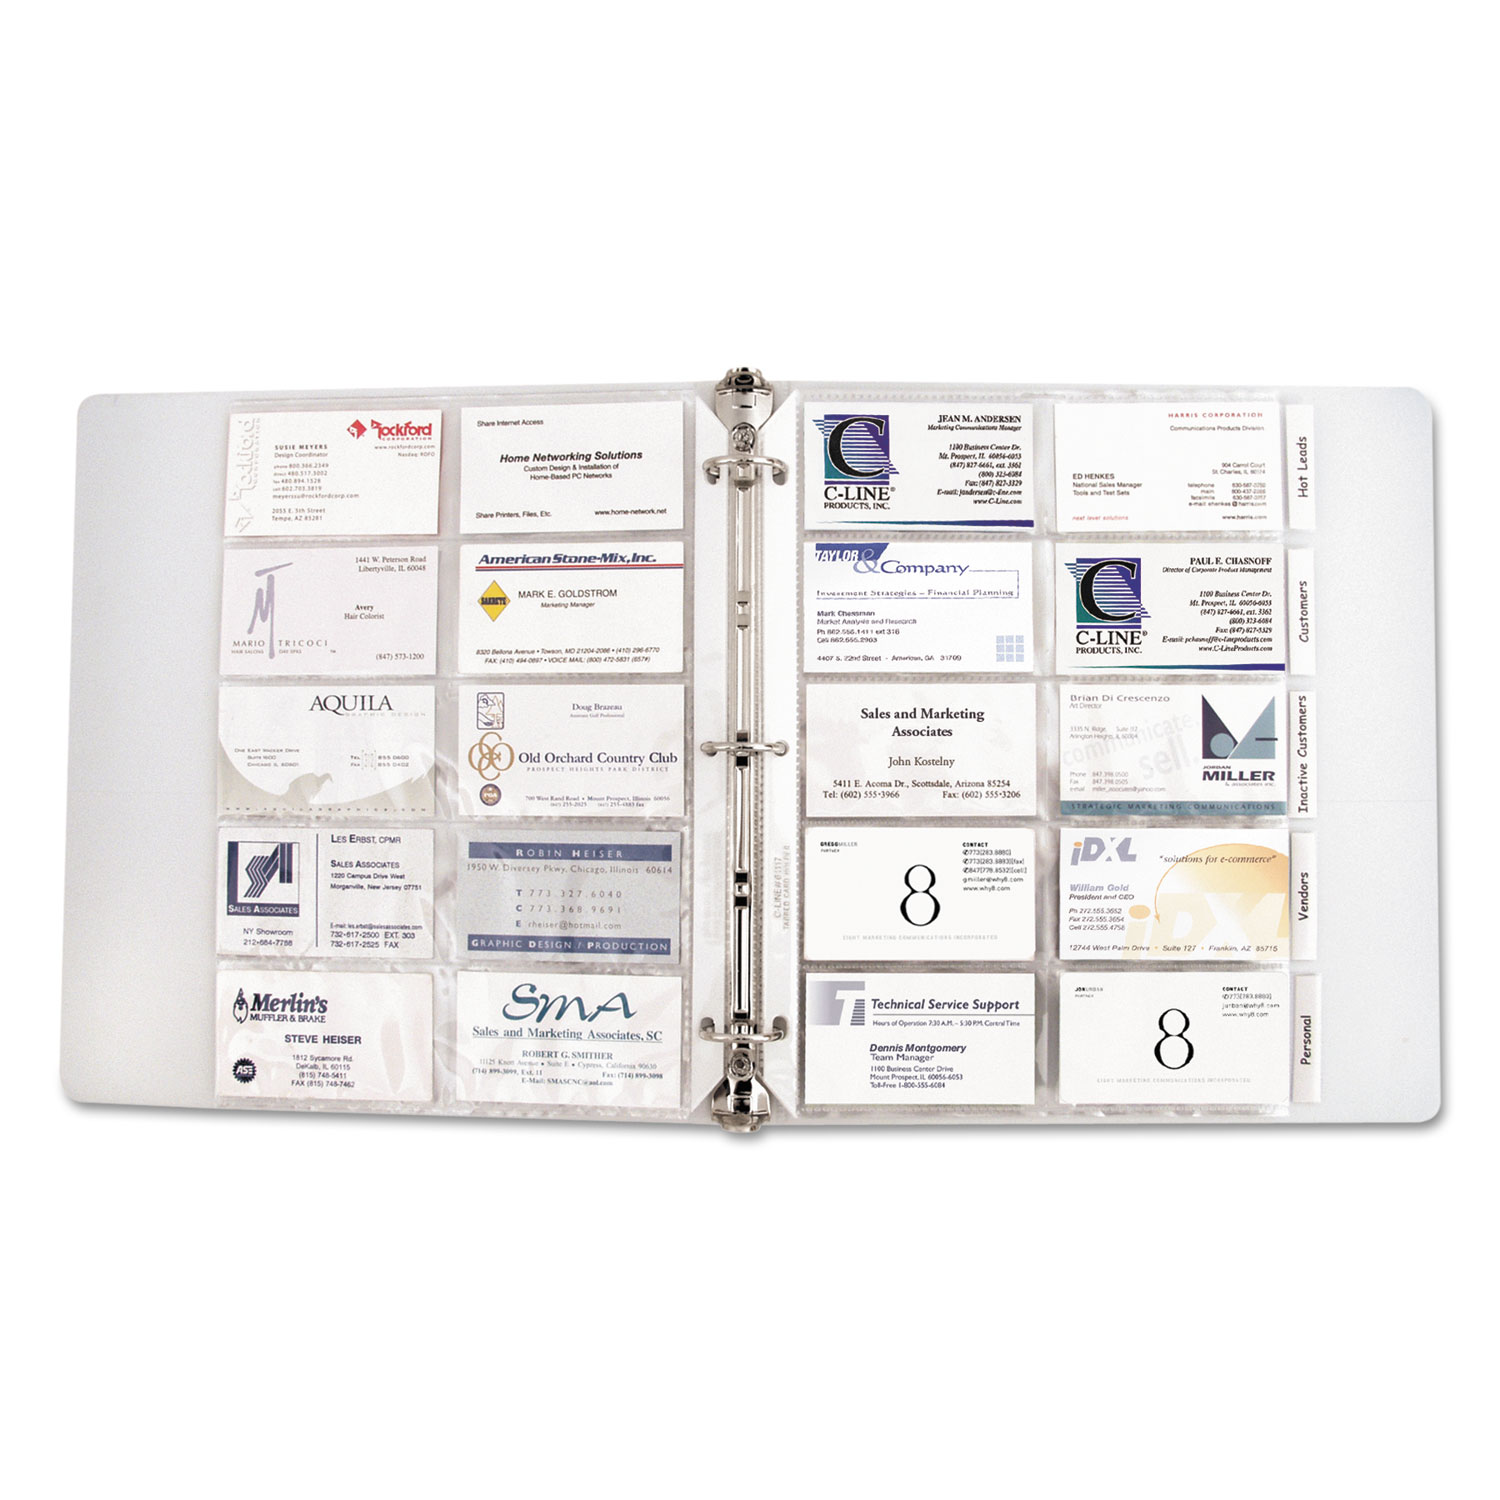  C-Line 61117 Tabbed Business Card Binder Pages, 20 Cards Per Letter Page, Clear, 5 Pages (CLI61117) 